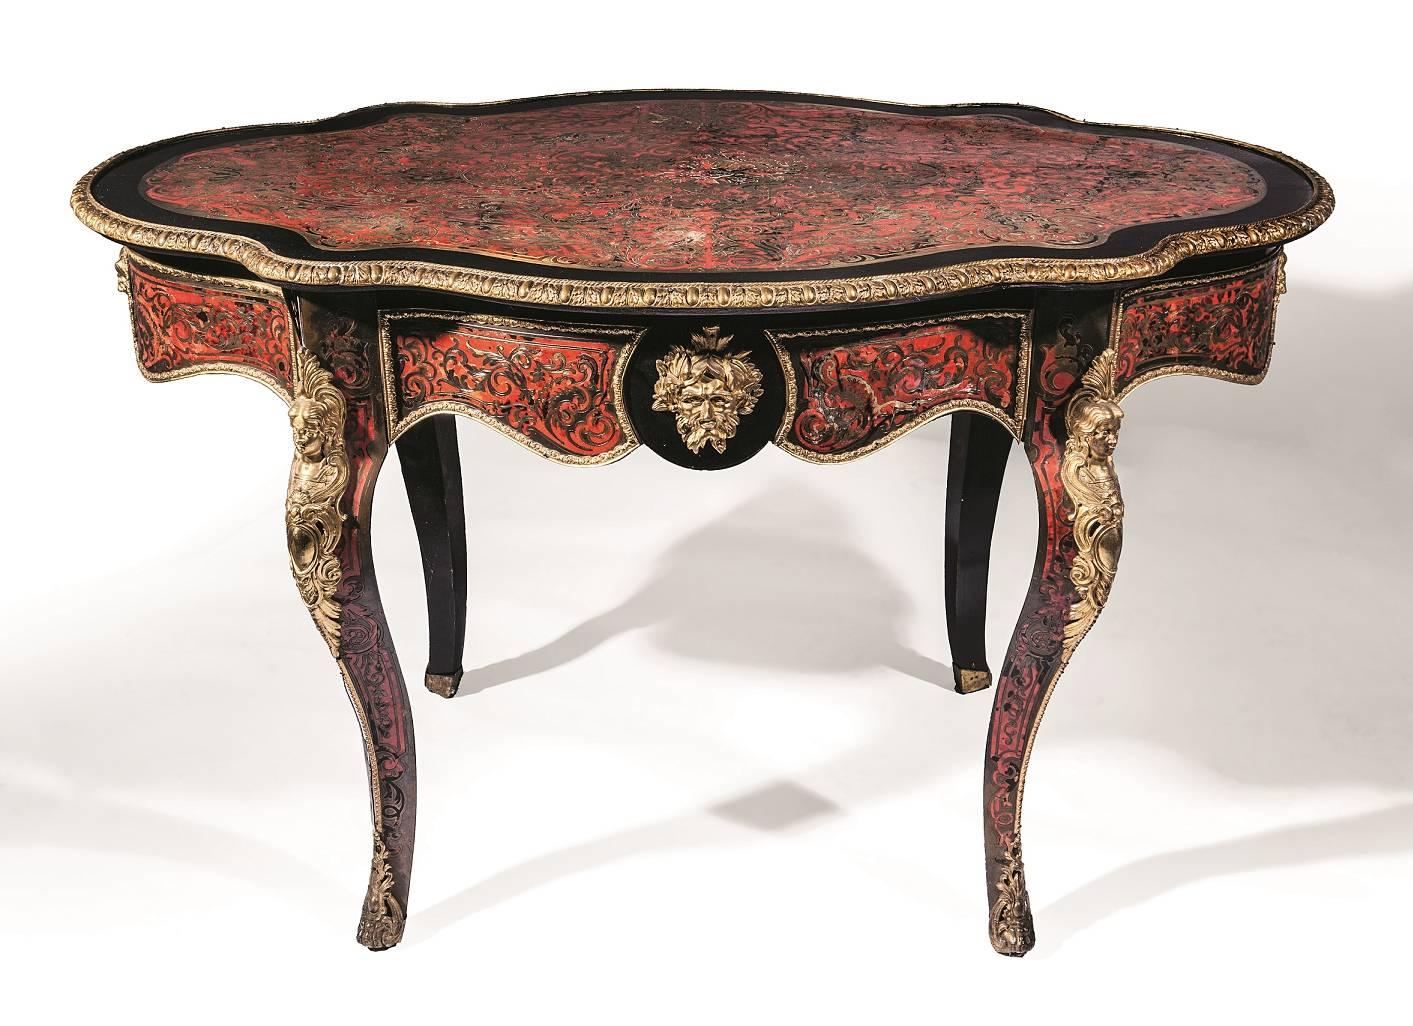 This fine table is crafted in ebonised wood and features gilt bronze mounts and Boulle style marquetry. The table is of curved, oval shape, and is inlaid with marquetry to the top, around the edges and along the lengths of the legs. The legs are of